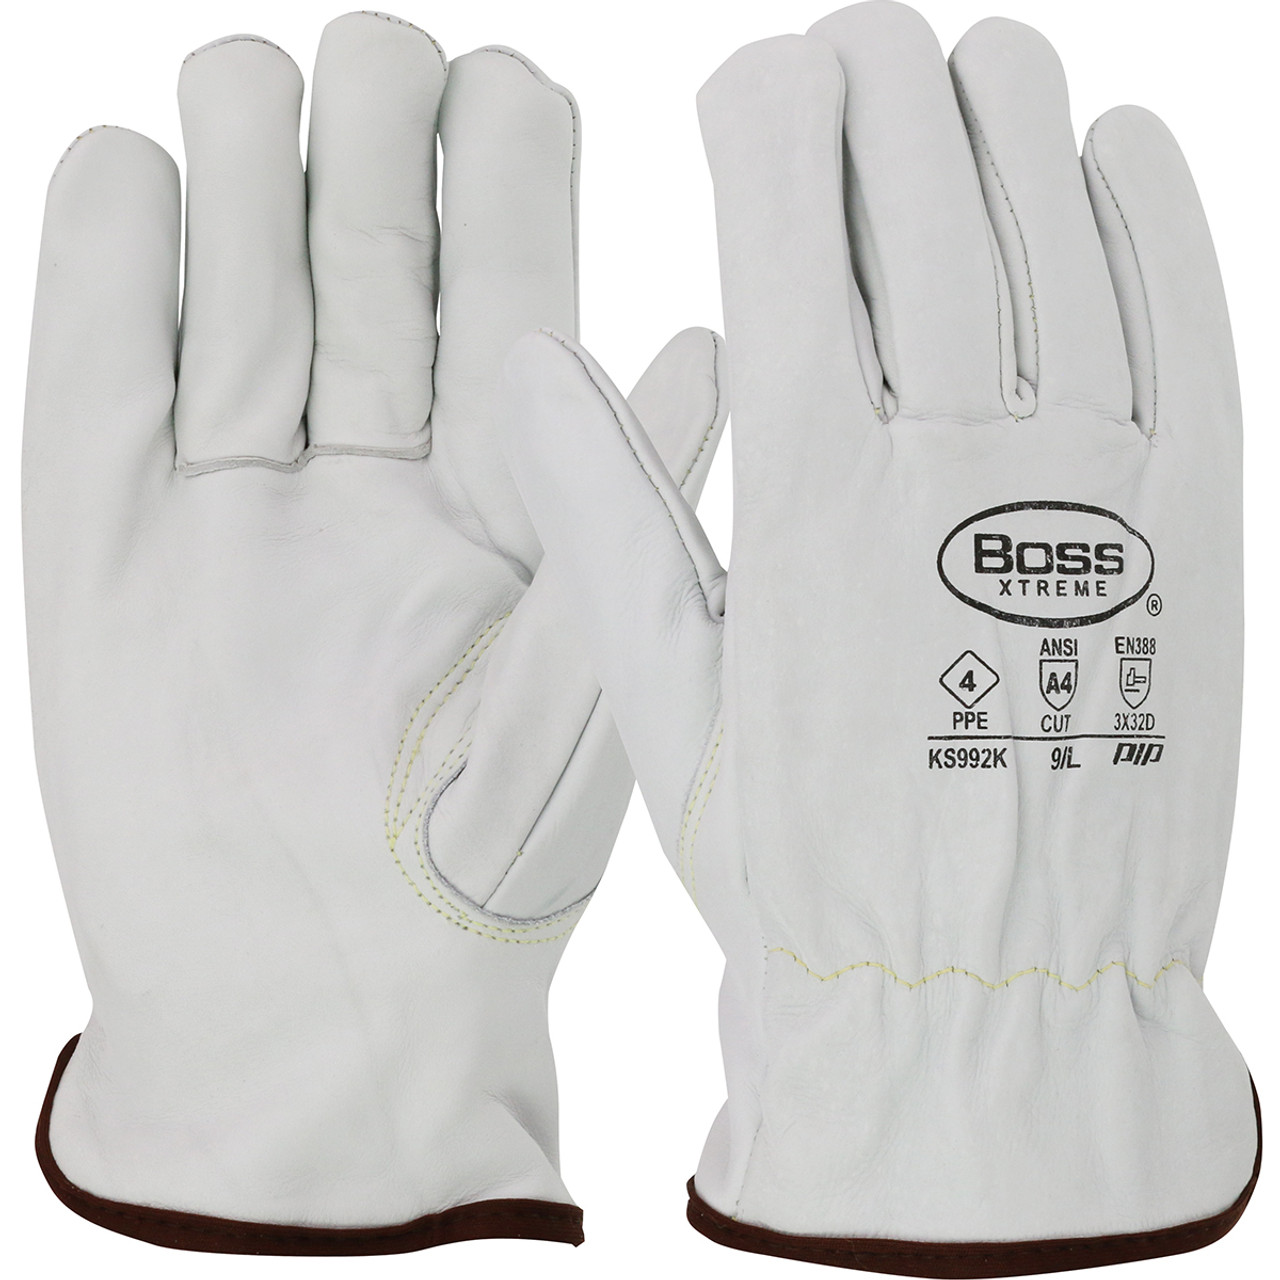 PIP Boss Xtreme Cowhide Leather Gloves KS992K (12 pairs)